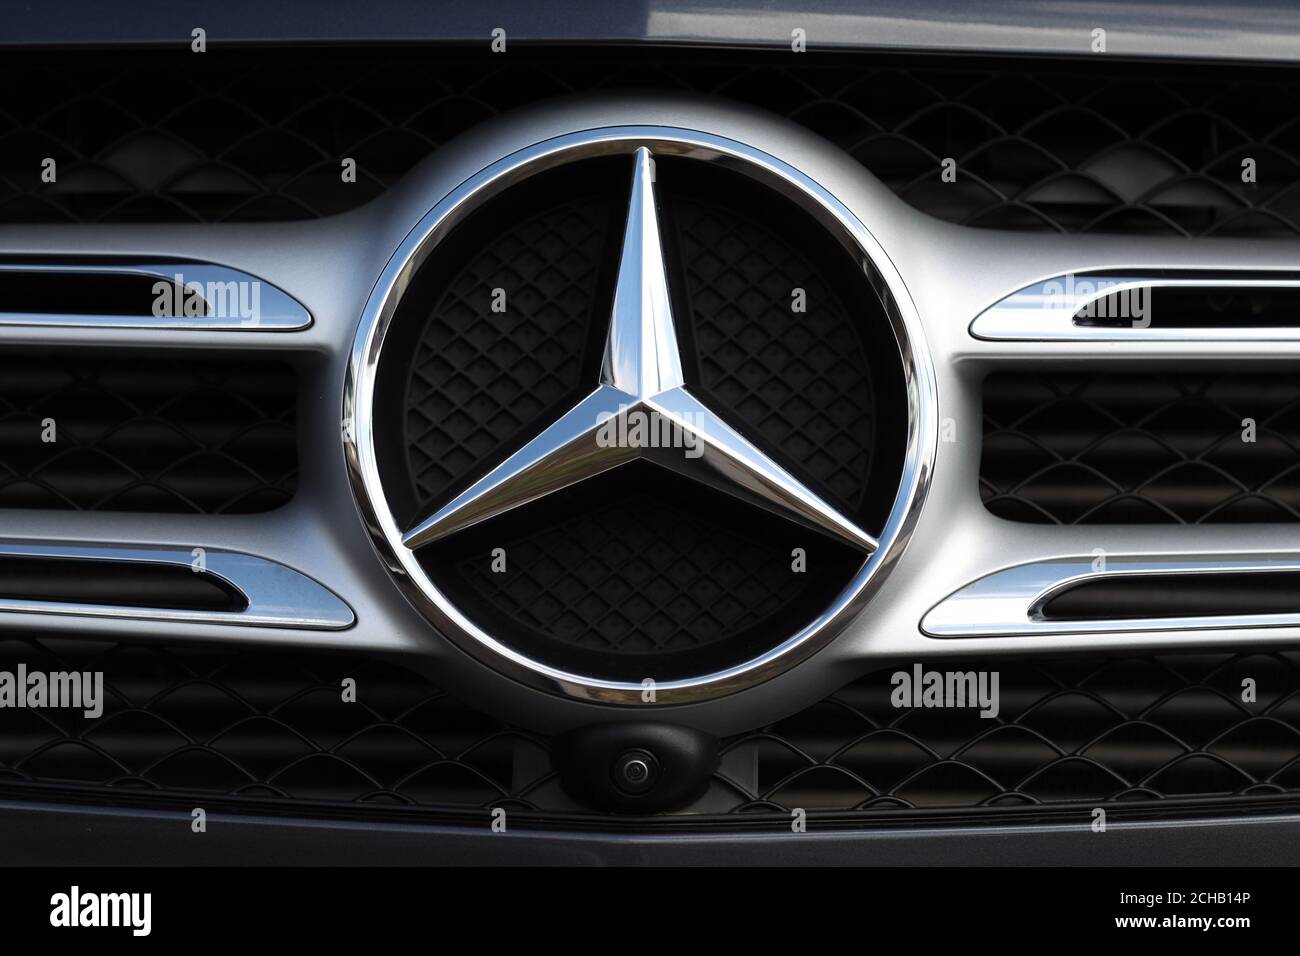 General view of a Mercedes car badge on the front grill of a car Stock Photo